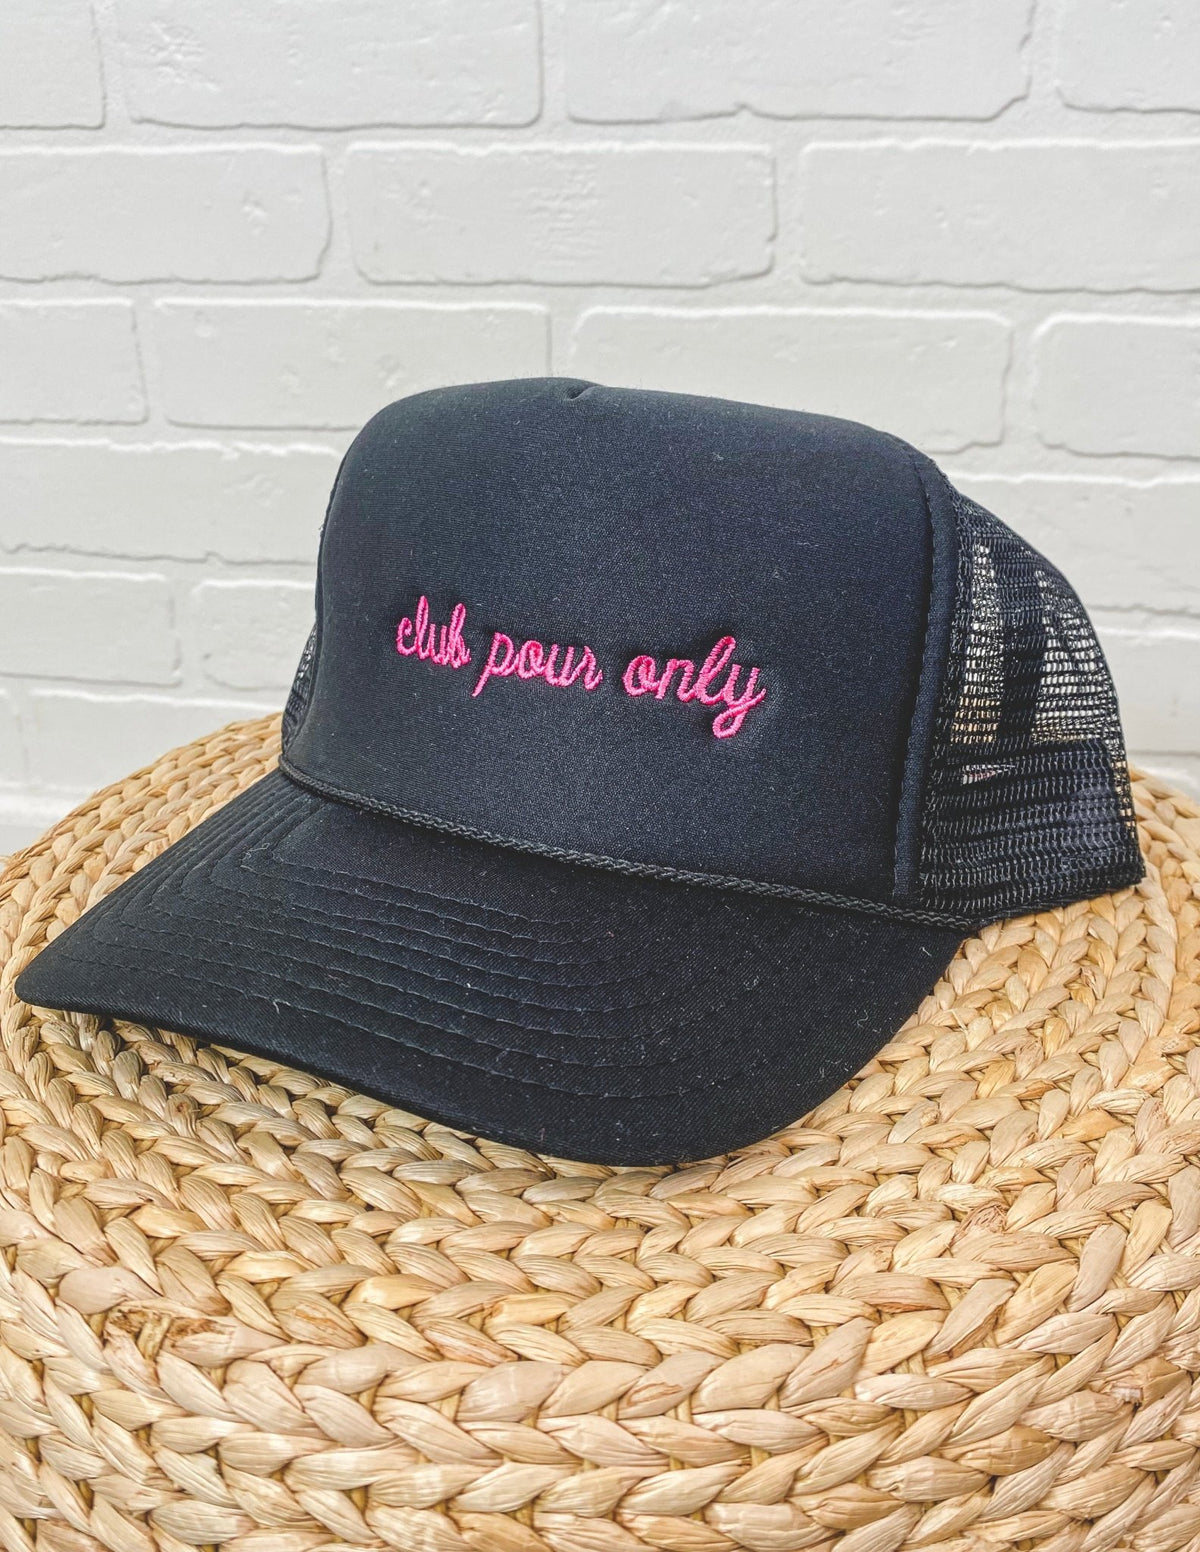 Club pour only trucker hat black - Trendy Hats at Lush Fashion Lounge Boutique in Oklahoma City